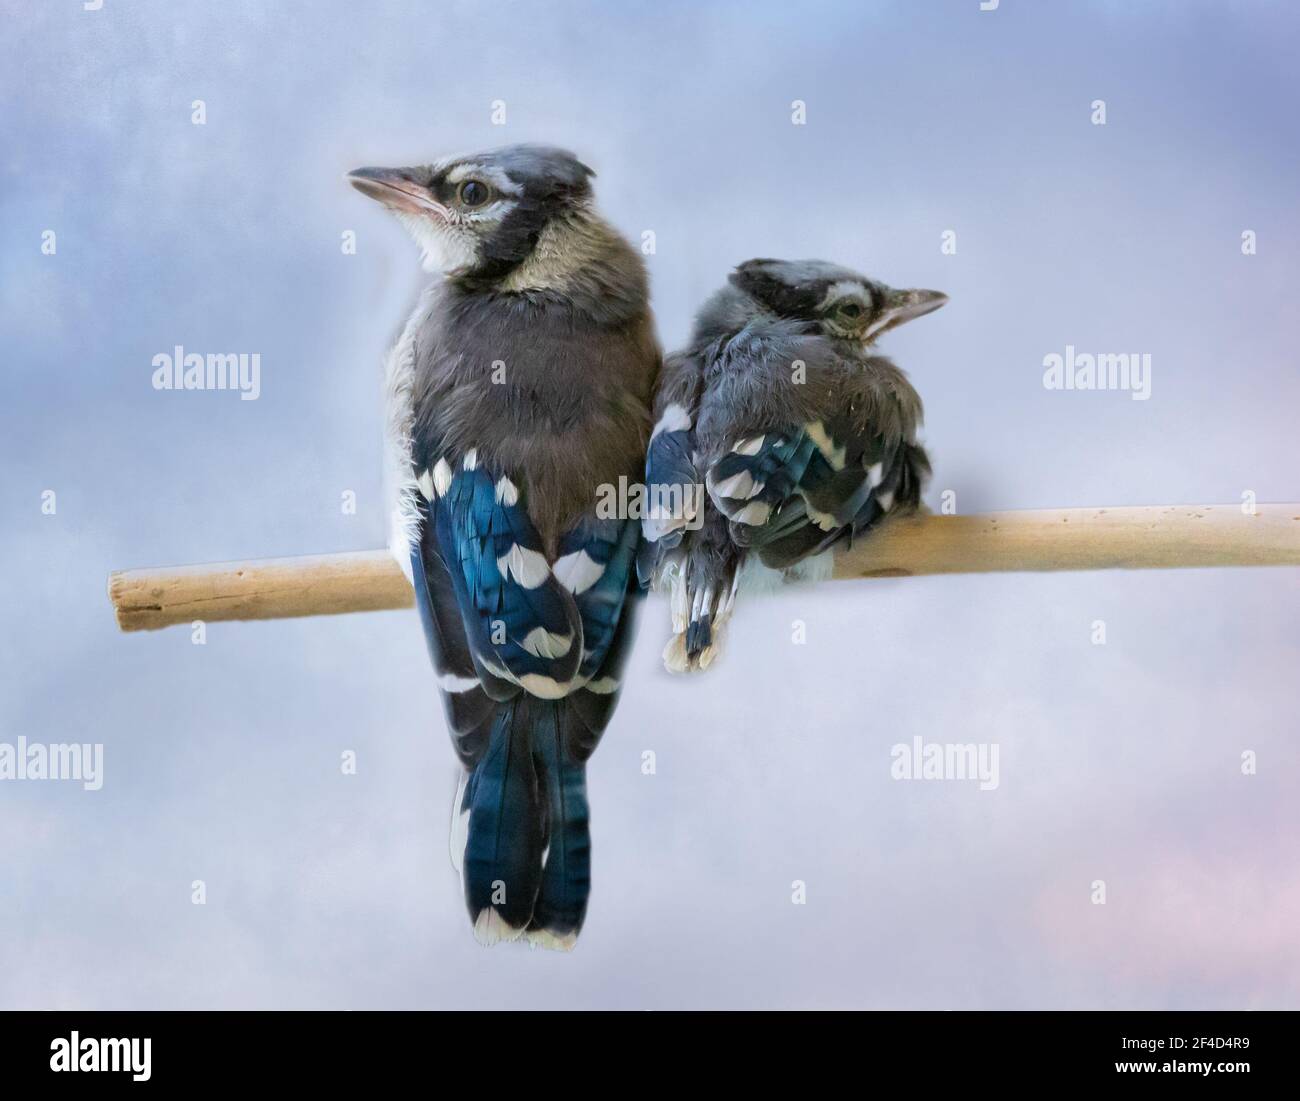 Two blue jay chicks in a wildlife rescue facility perched together. Stock Photo